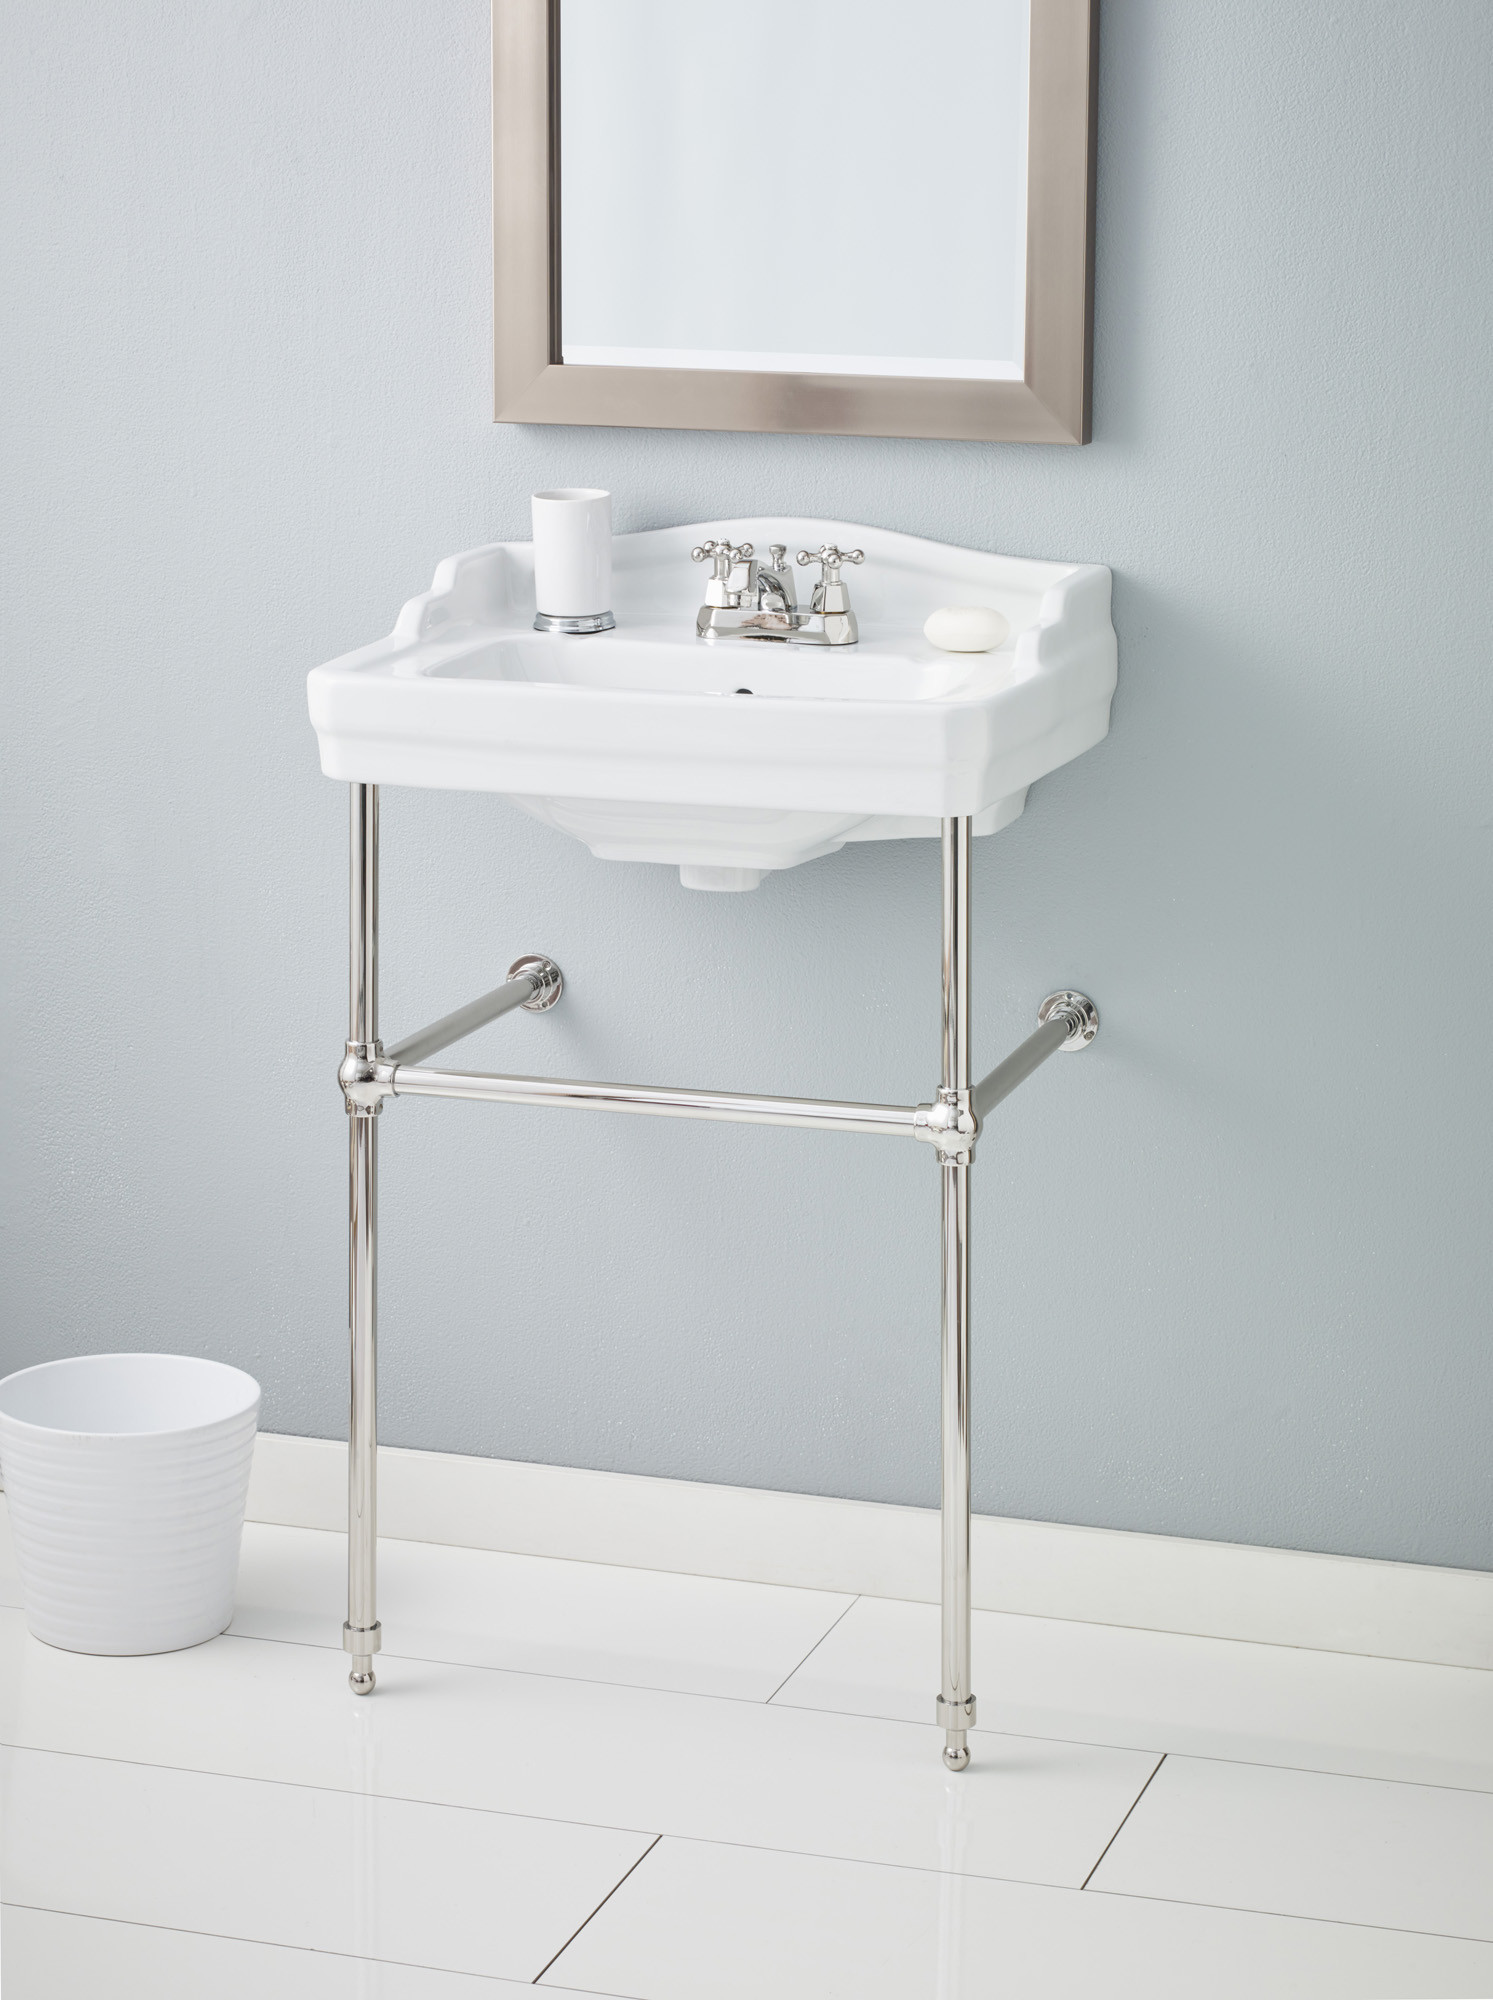 Cheviot 553-WH-8-575-PN Essex Lavatory Sink in White with Polished Nickel Console